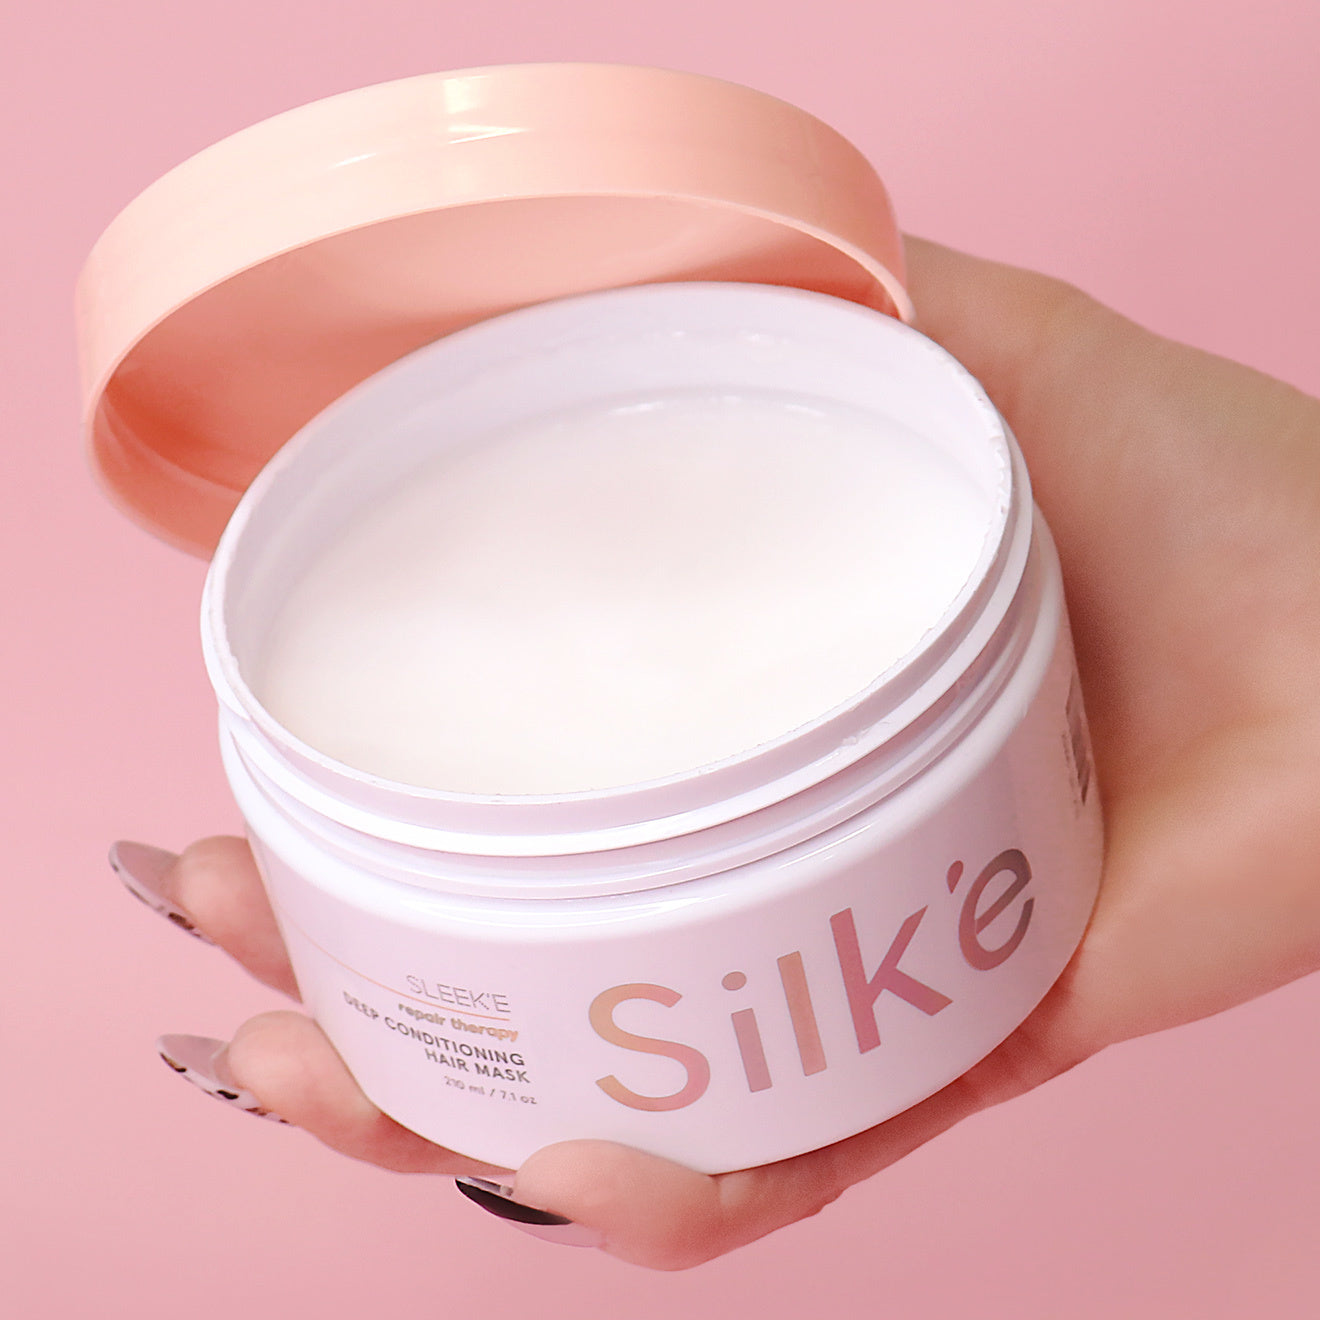 A jar of Silk'e Repair therapy Hair Mask on a pink background.